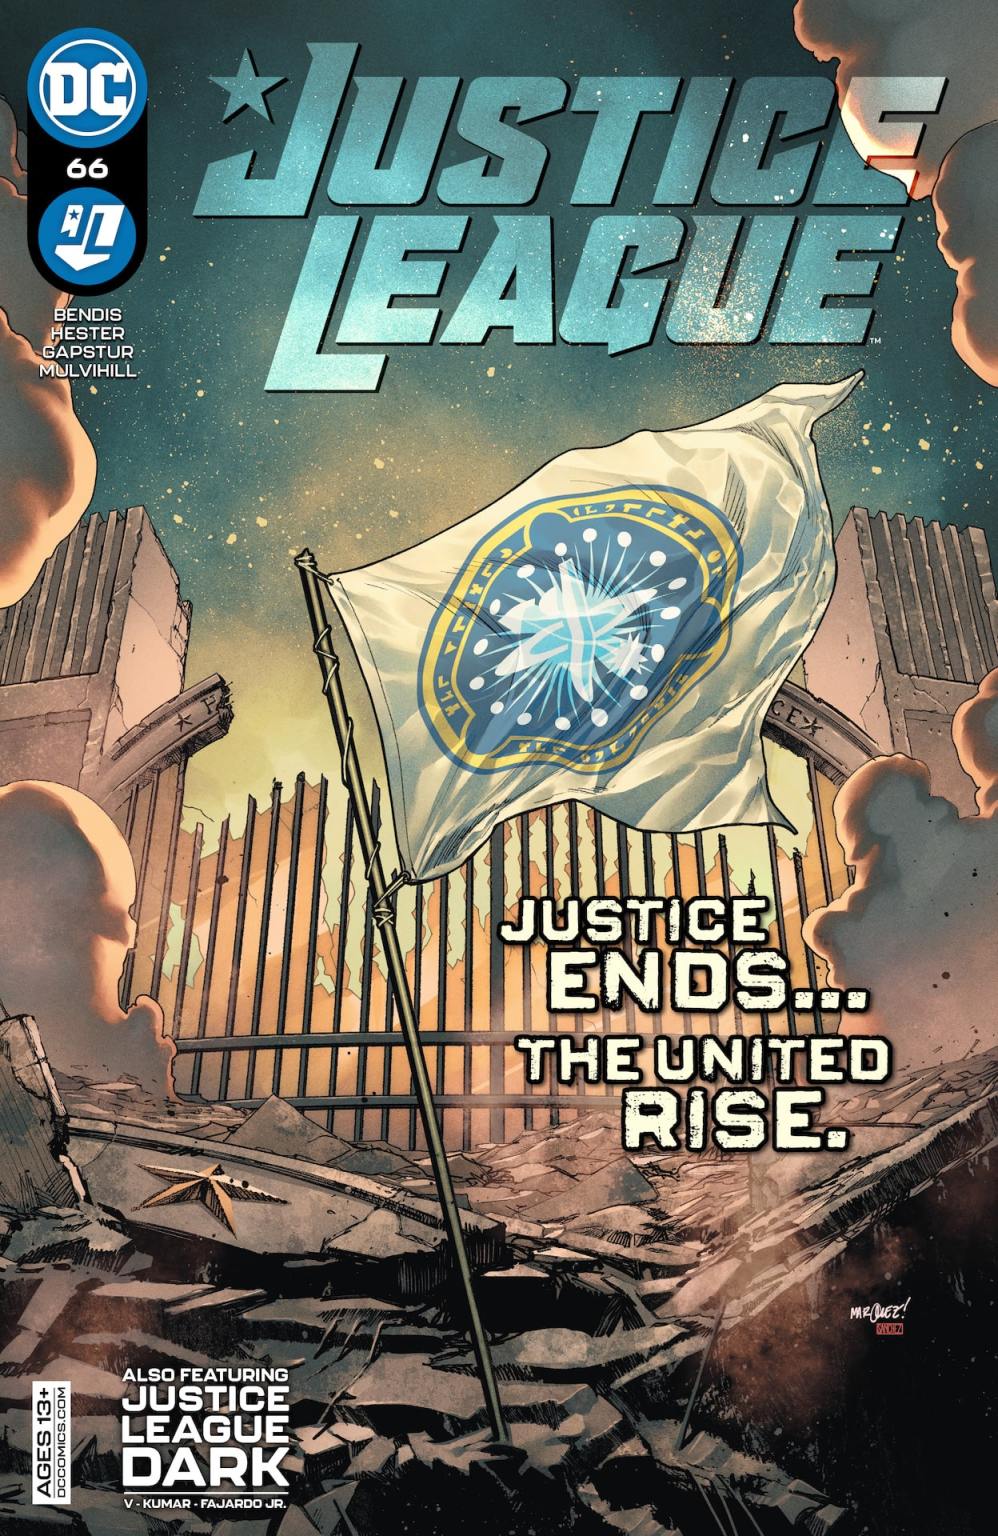 Justice League 66 - Heroes Cave